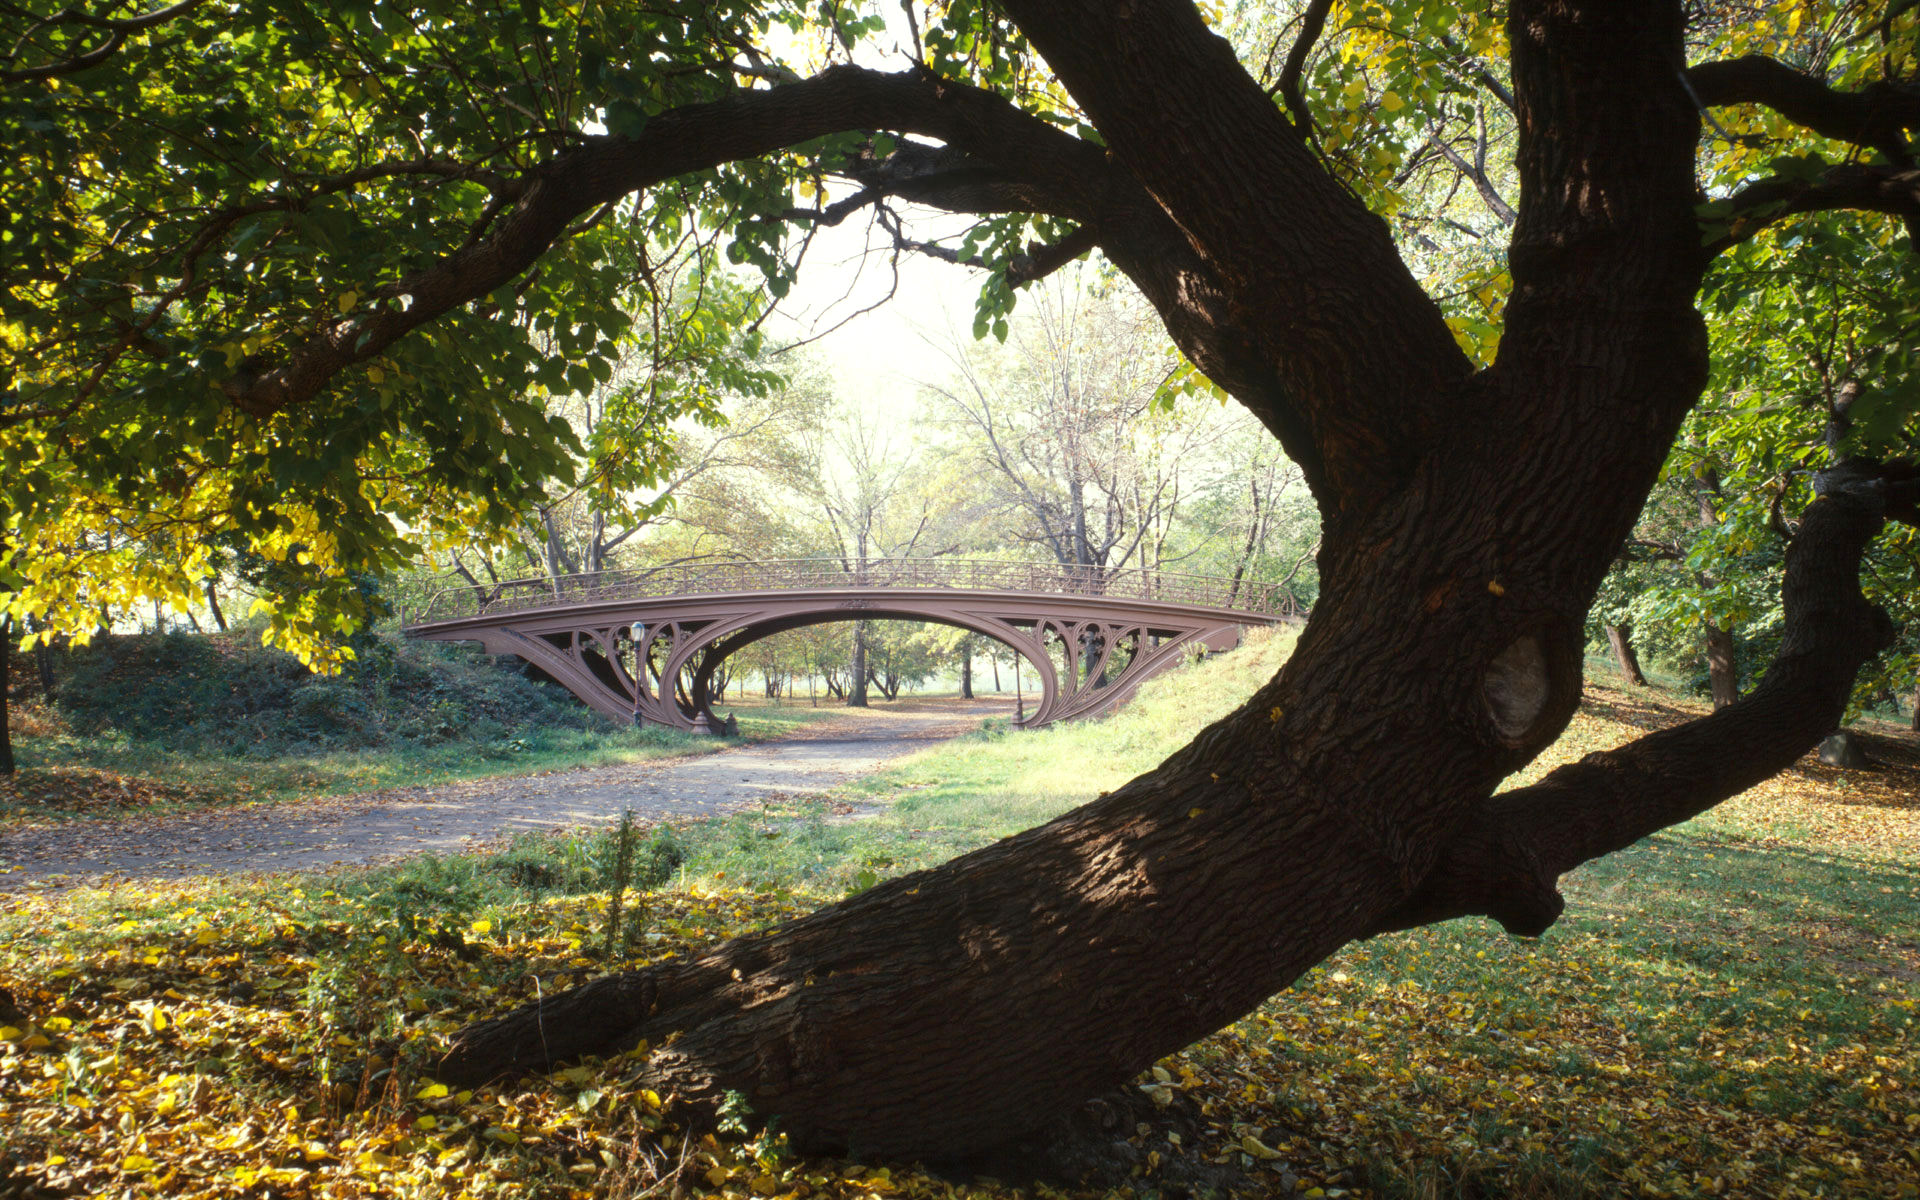 Download New Wallpapers Hd Group - Oak Tree In Central Park - HD Wallpaper 